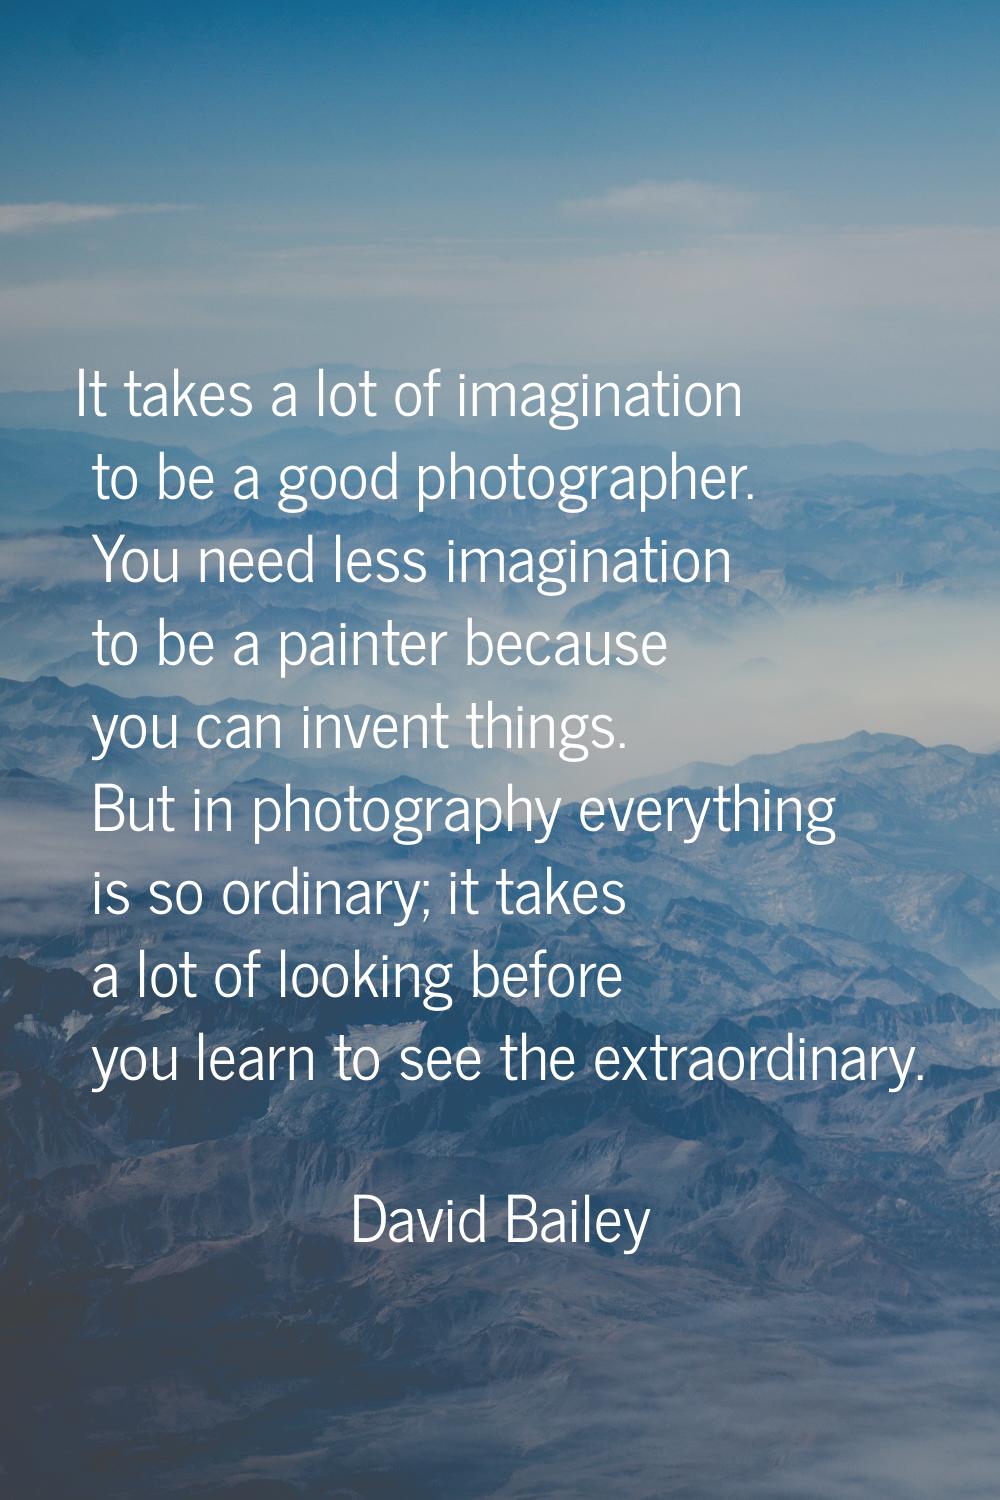 It takes a lot of imagination to be a good photographer. You need less imagination to be a painter 